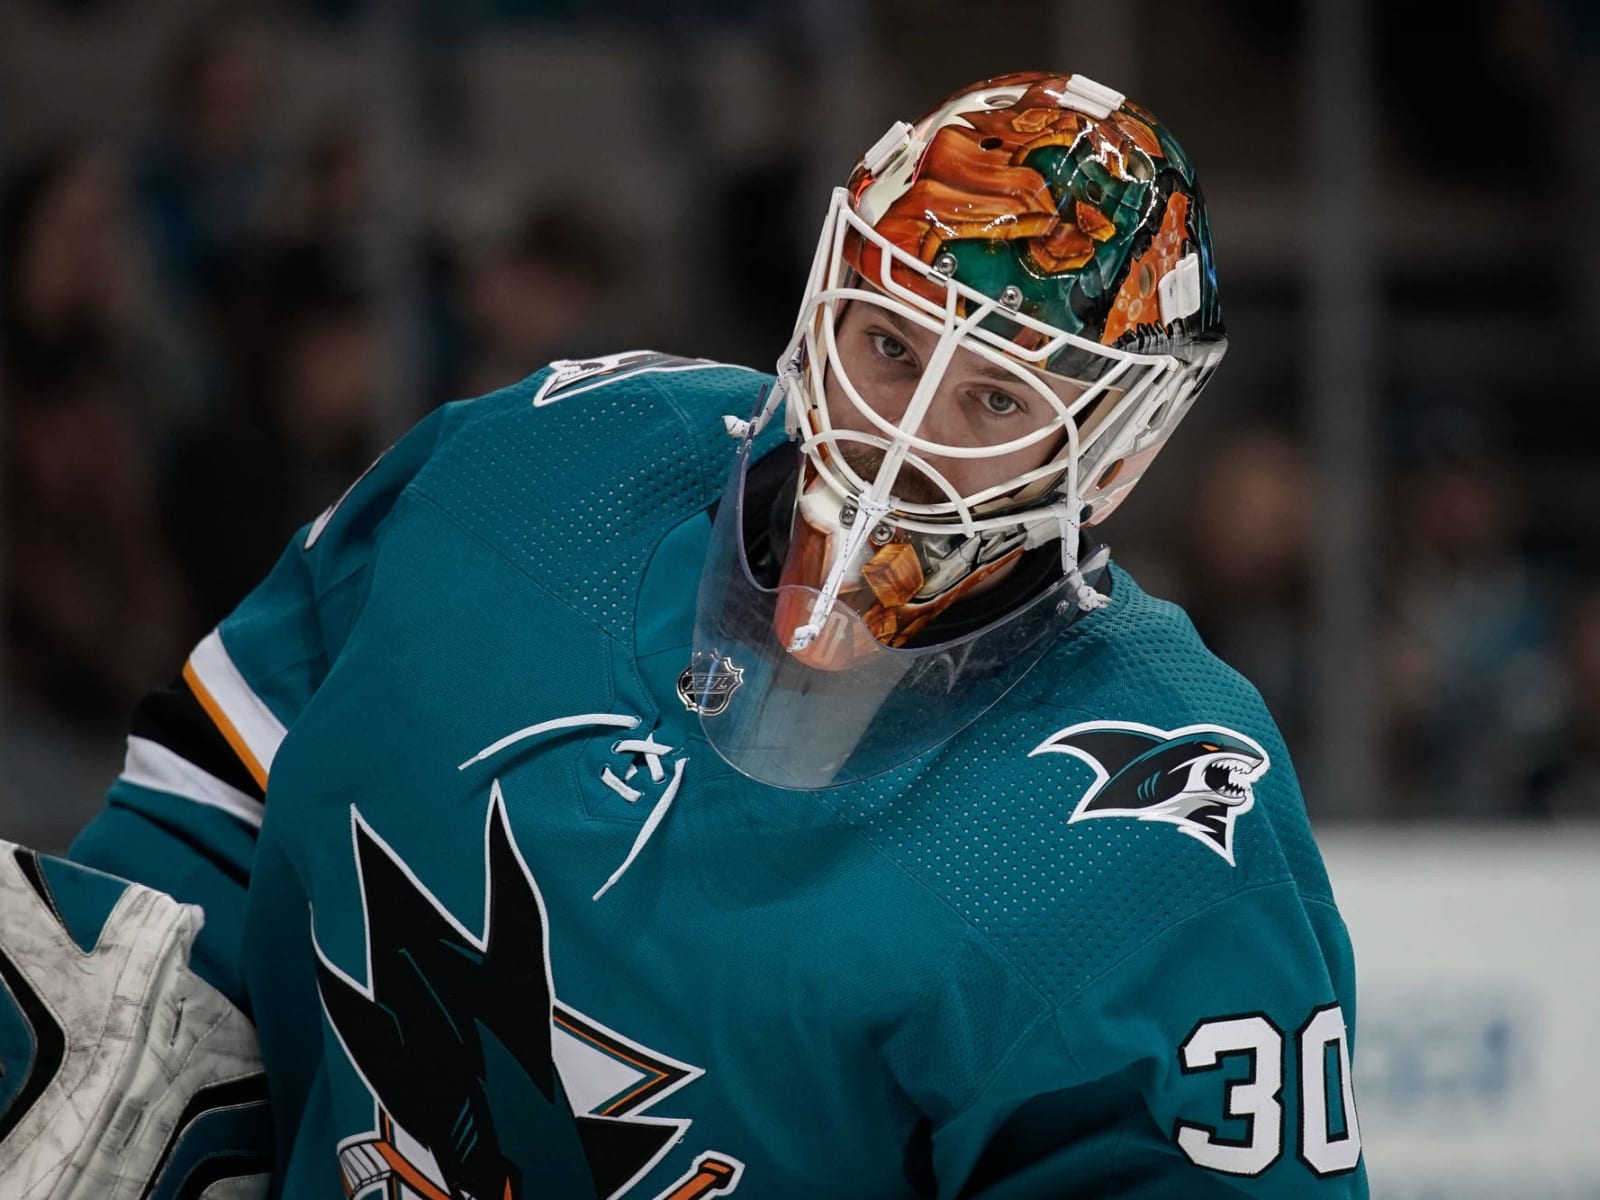 Sharks goalie Aaron Dell's improved play could make him trade target